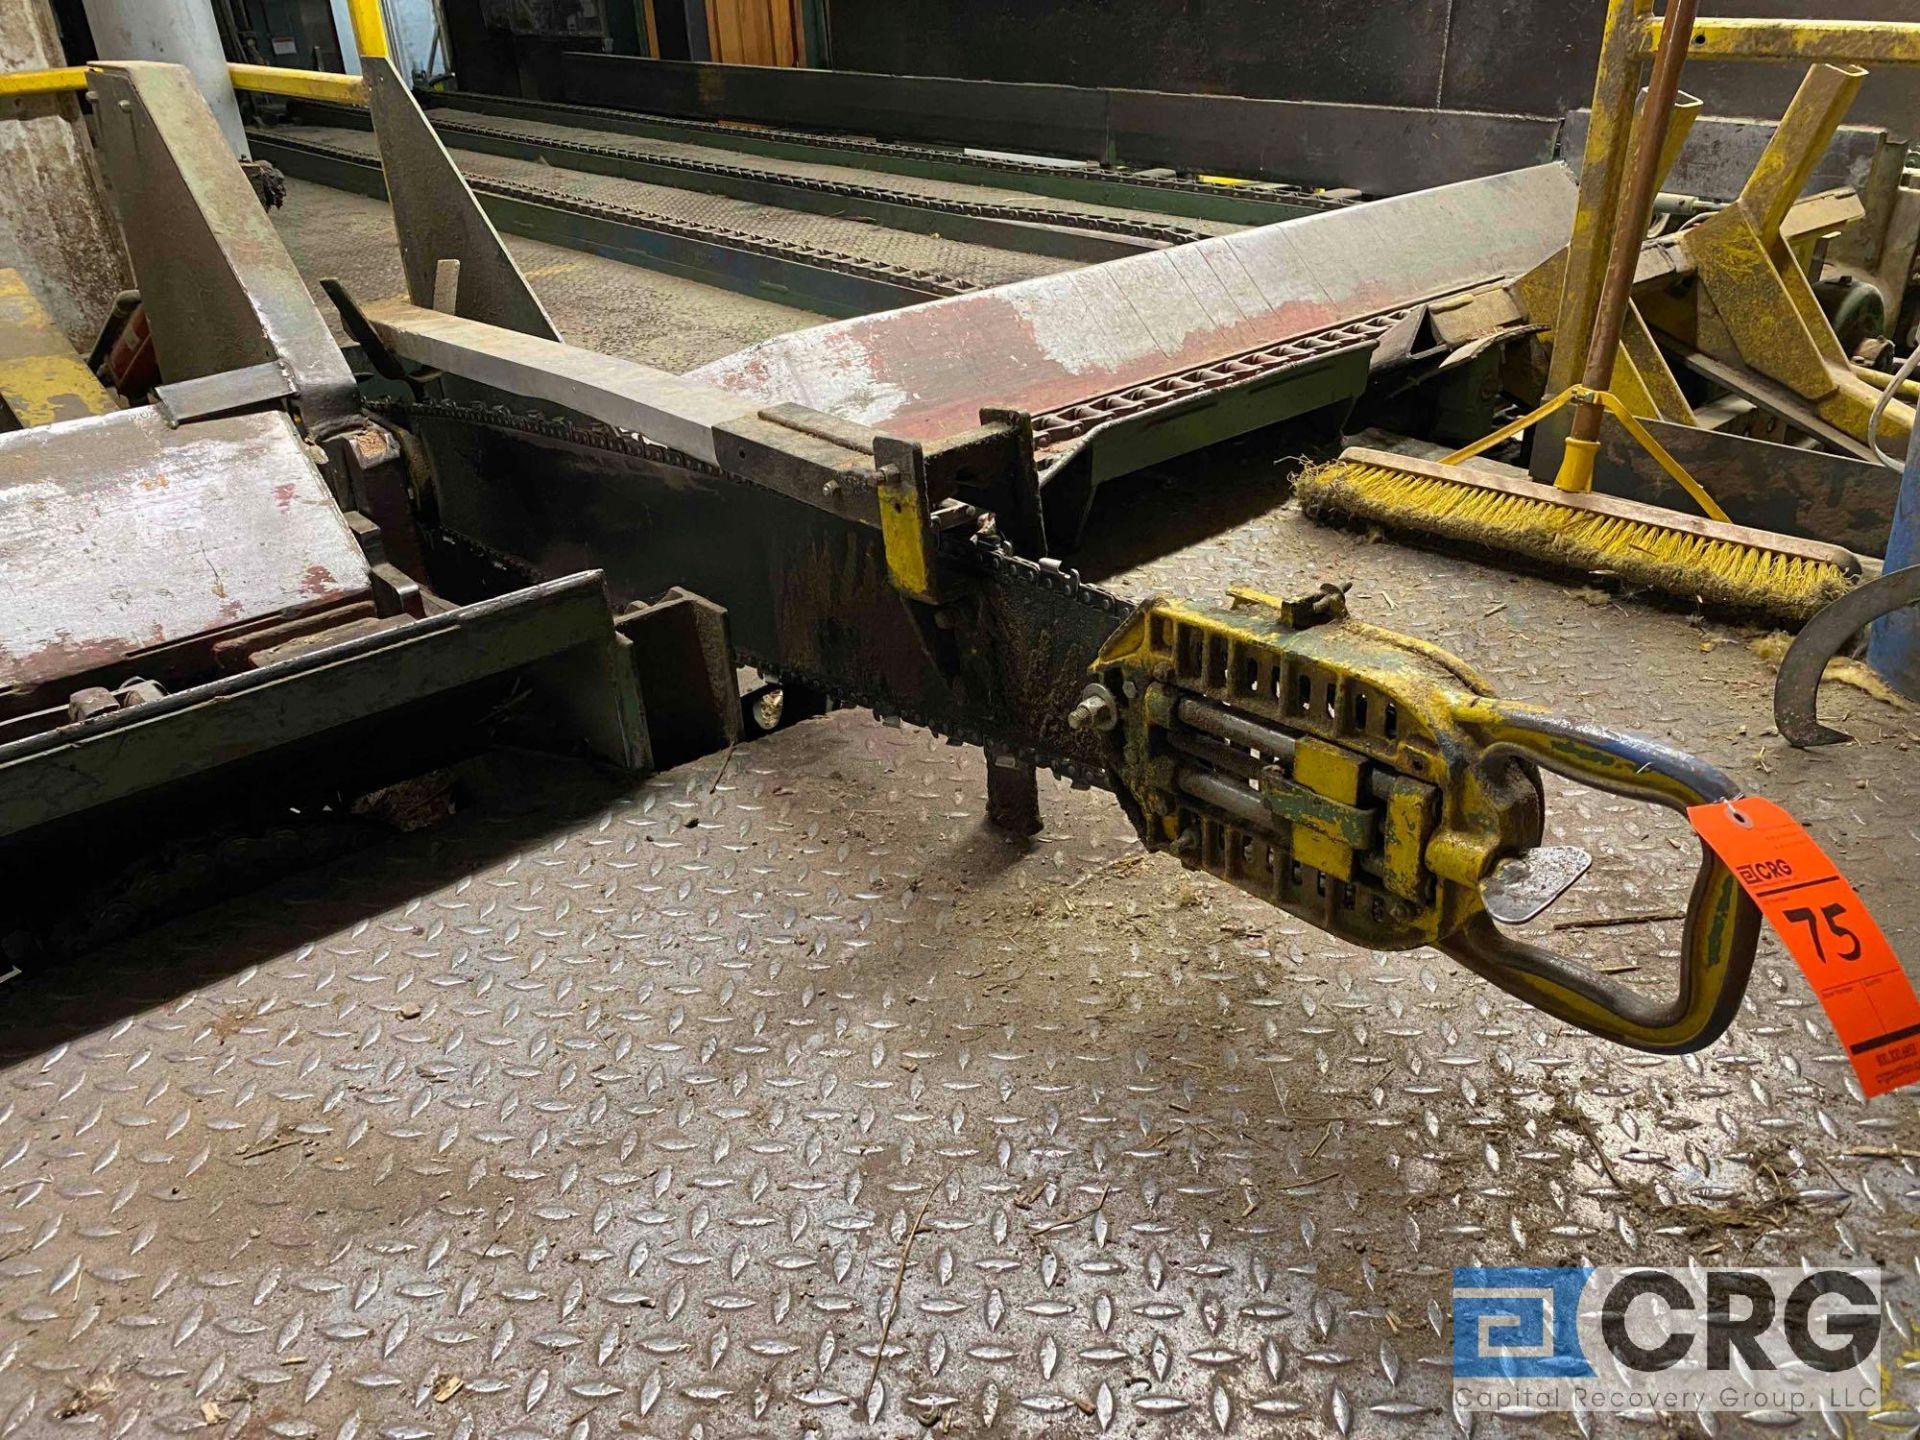 LM deck saw, with 80in. chainsaw blade, including drive-LOCATED IN PINE VALLEY